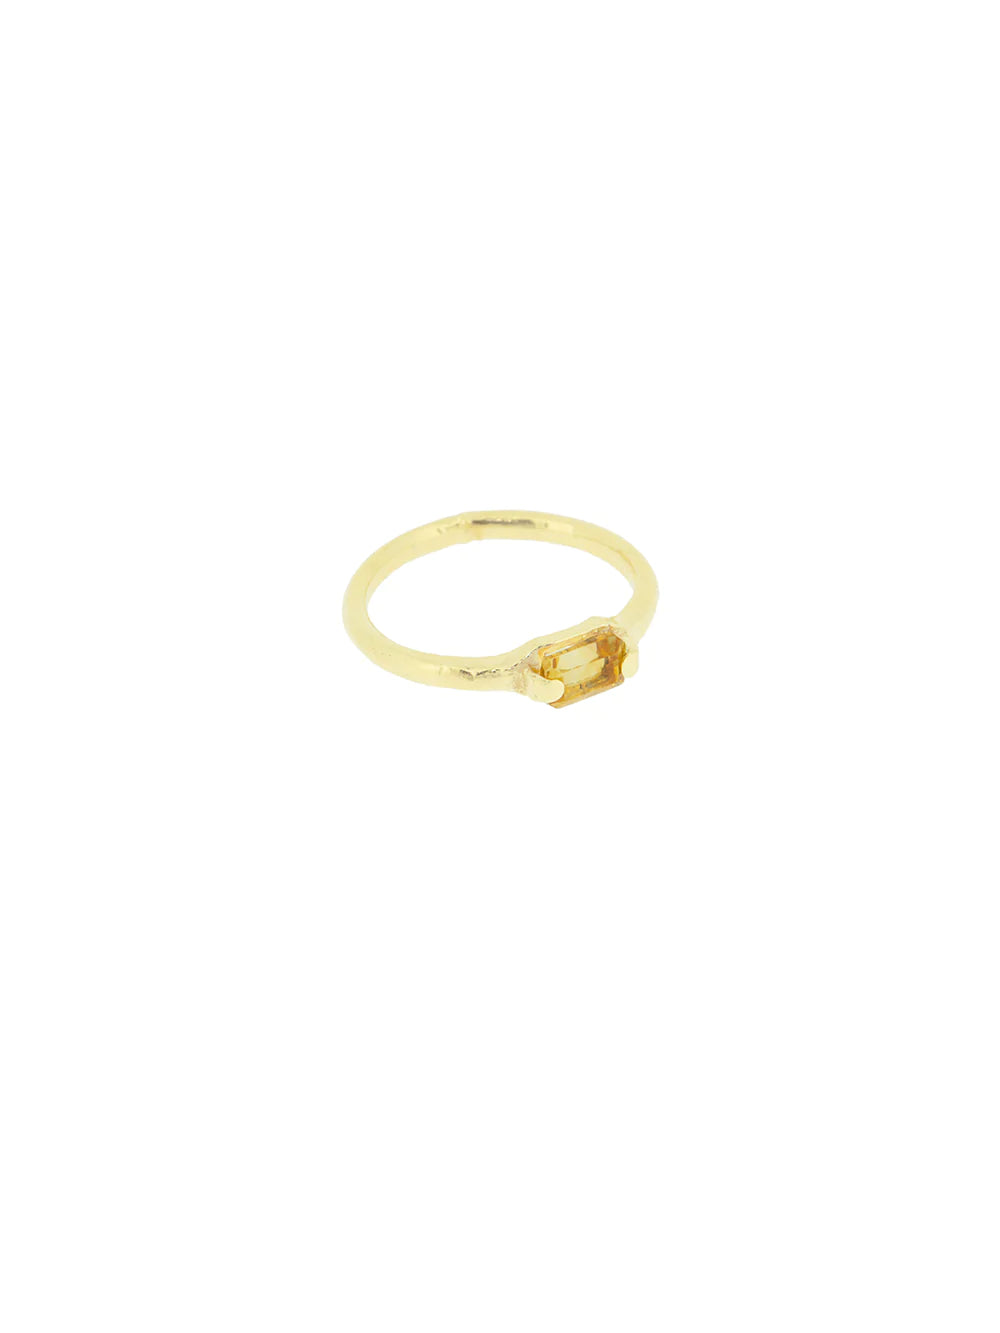 SHINING citrine ring⎜Goldplated